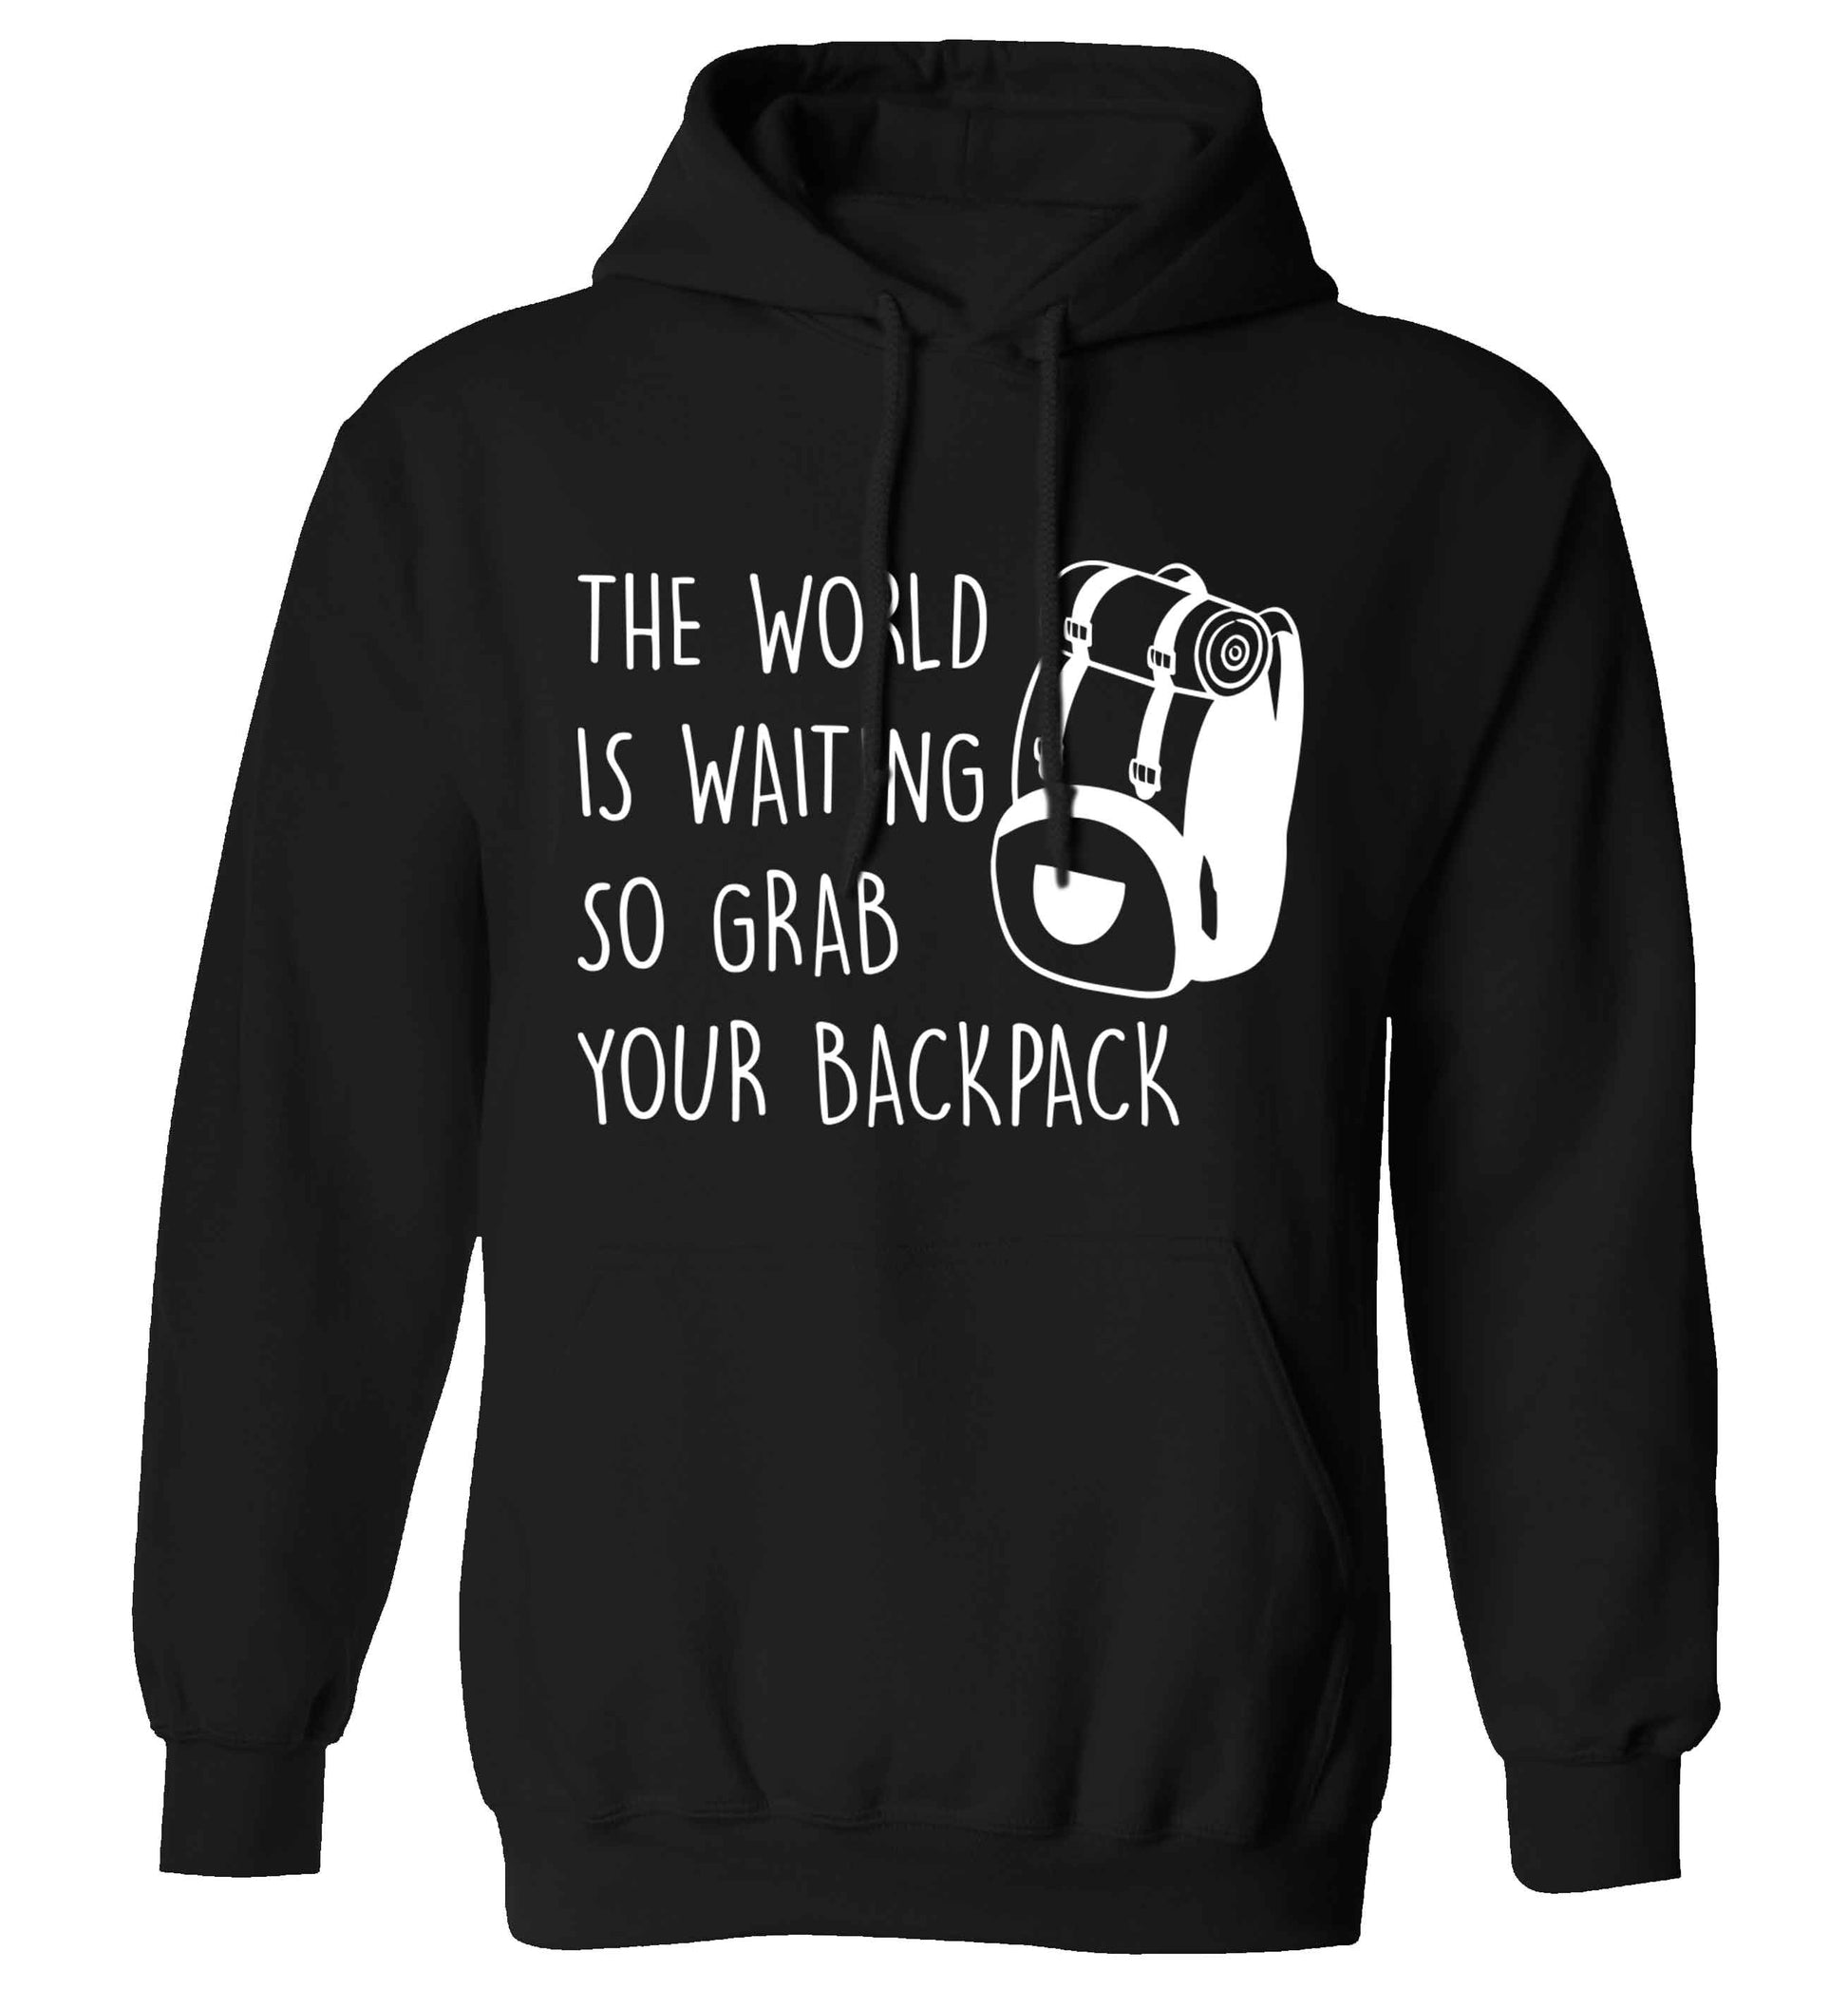 The world is waiting so grab your backpack adults unisex black hoodie 2XL